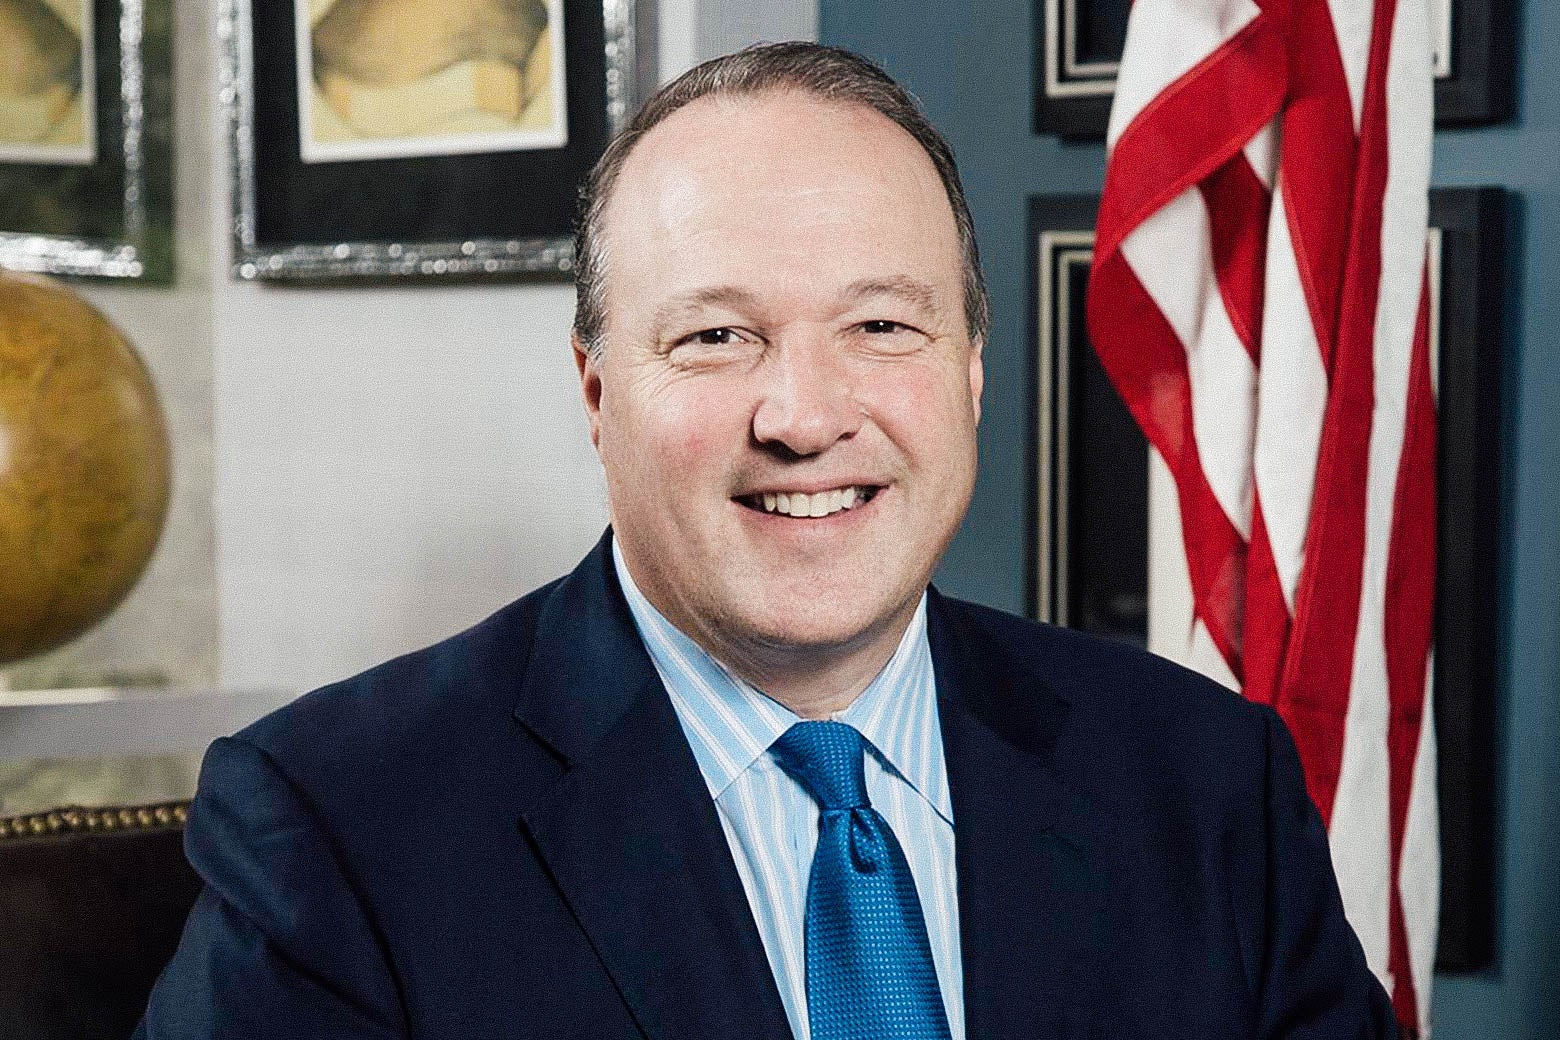 A smiling besuited man in an office with an U.S. flag 